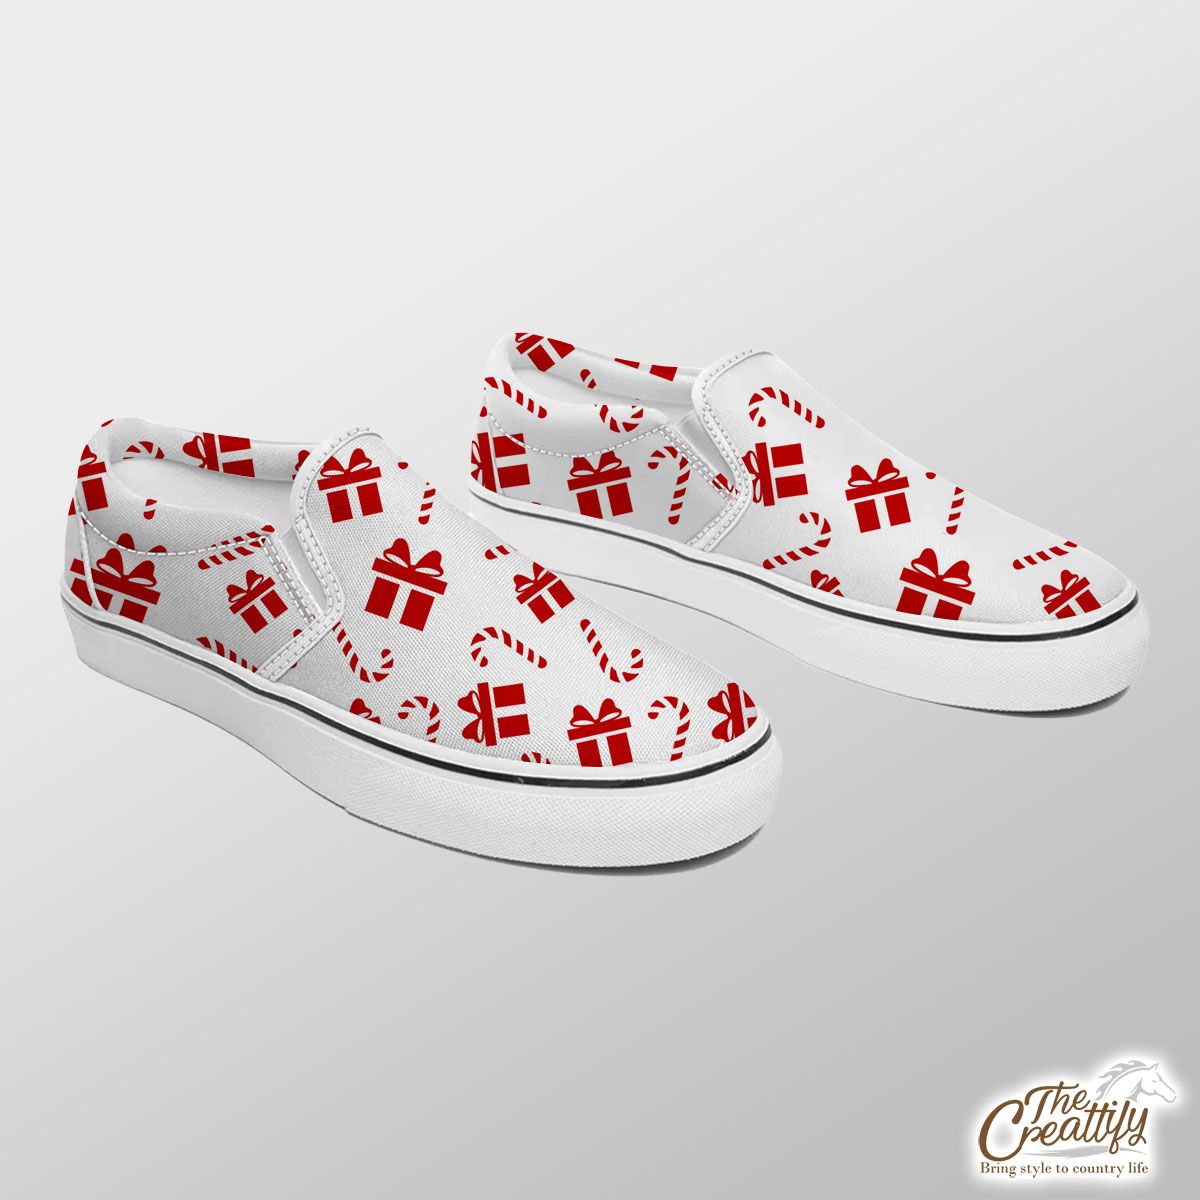 Christmas Gifts And Candy Canes Seamless White Pattern Slip On Sneakers